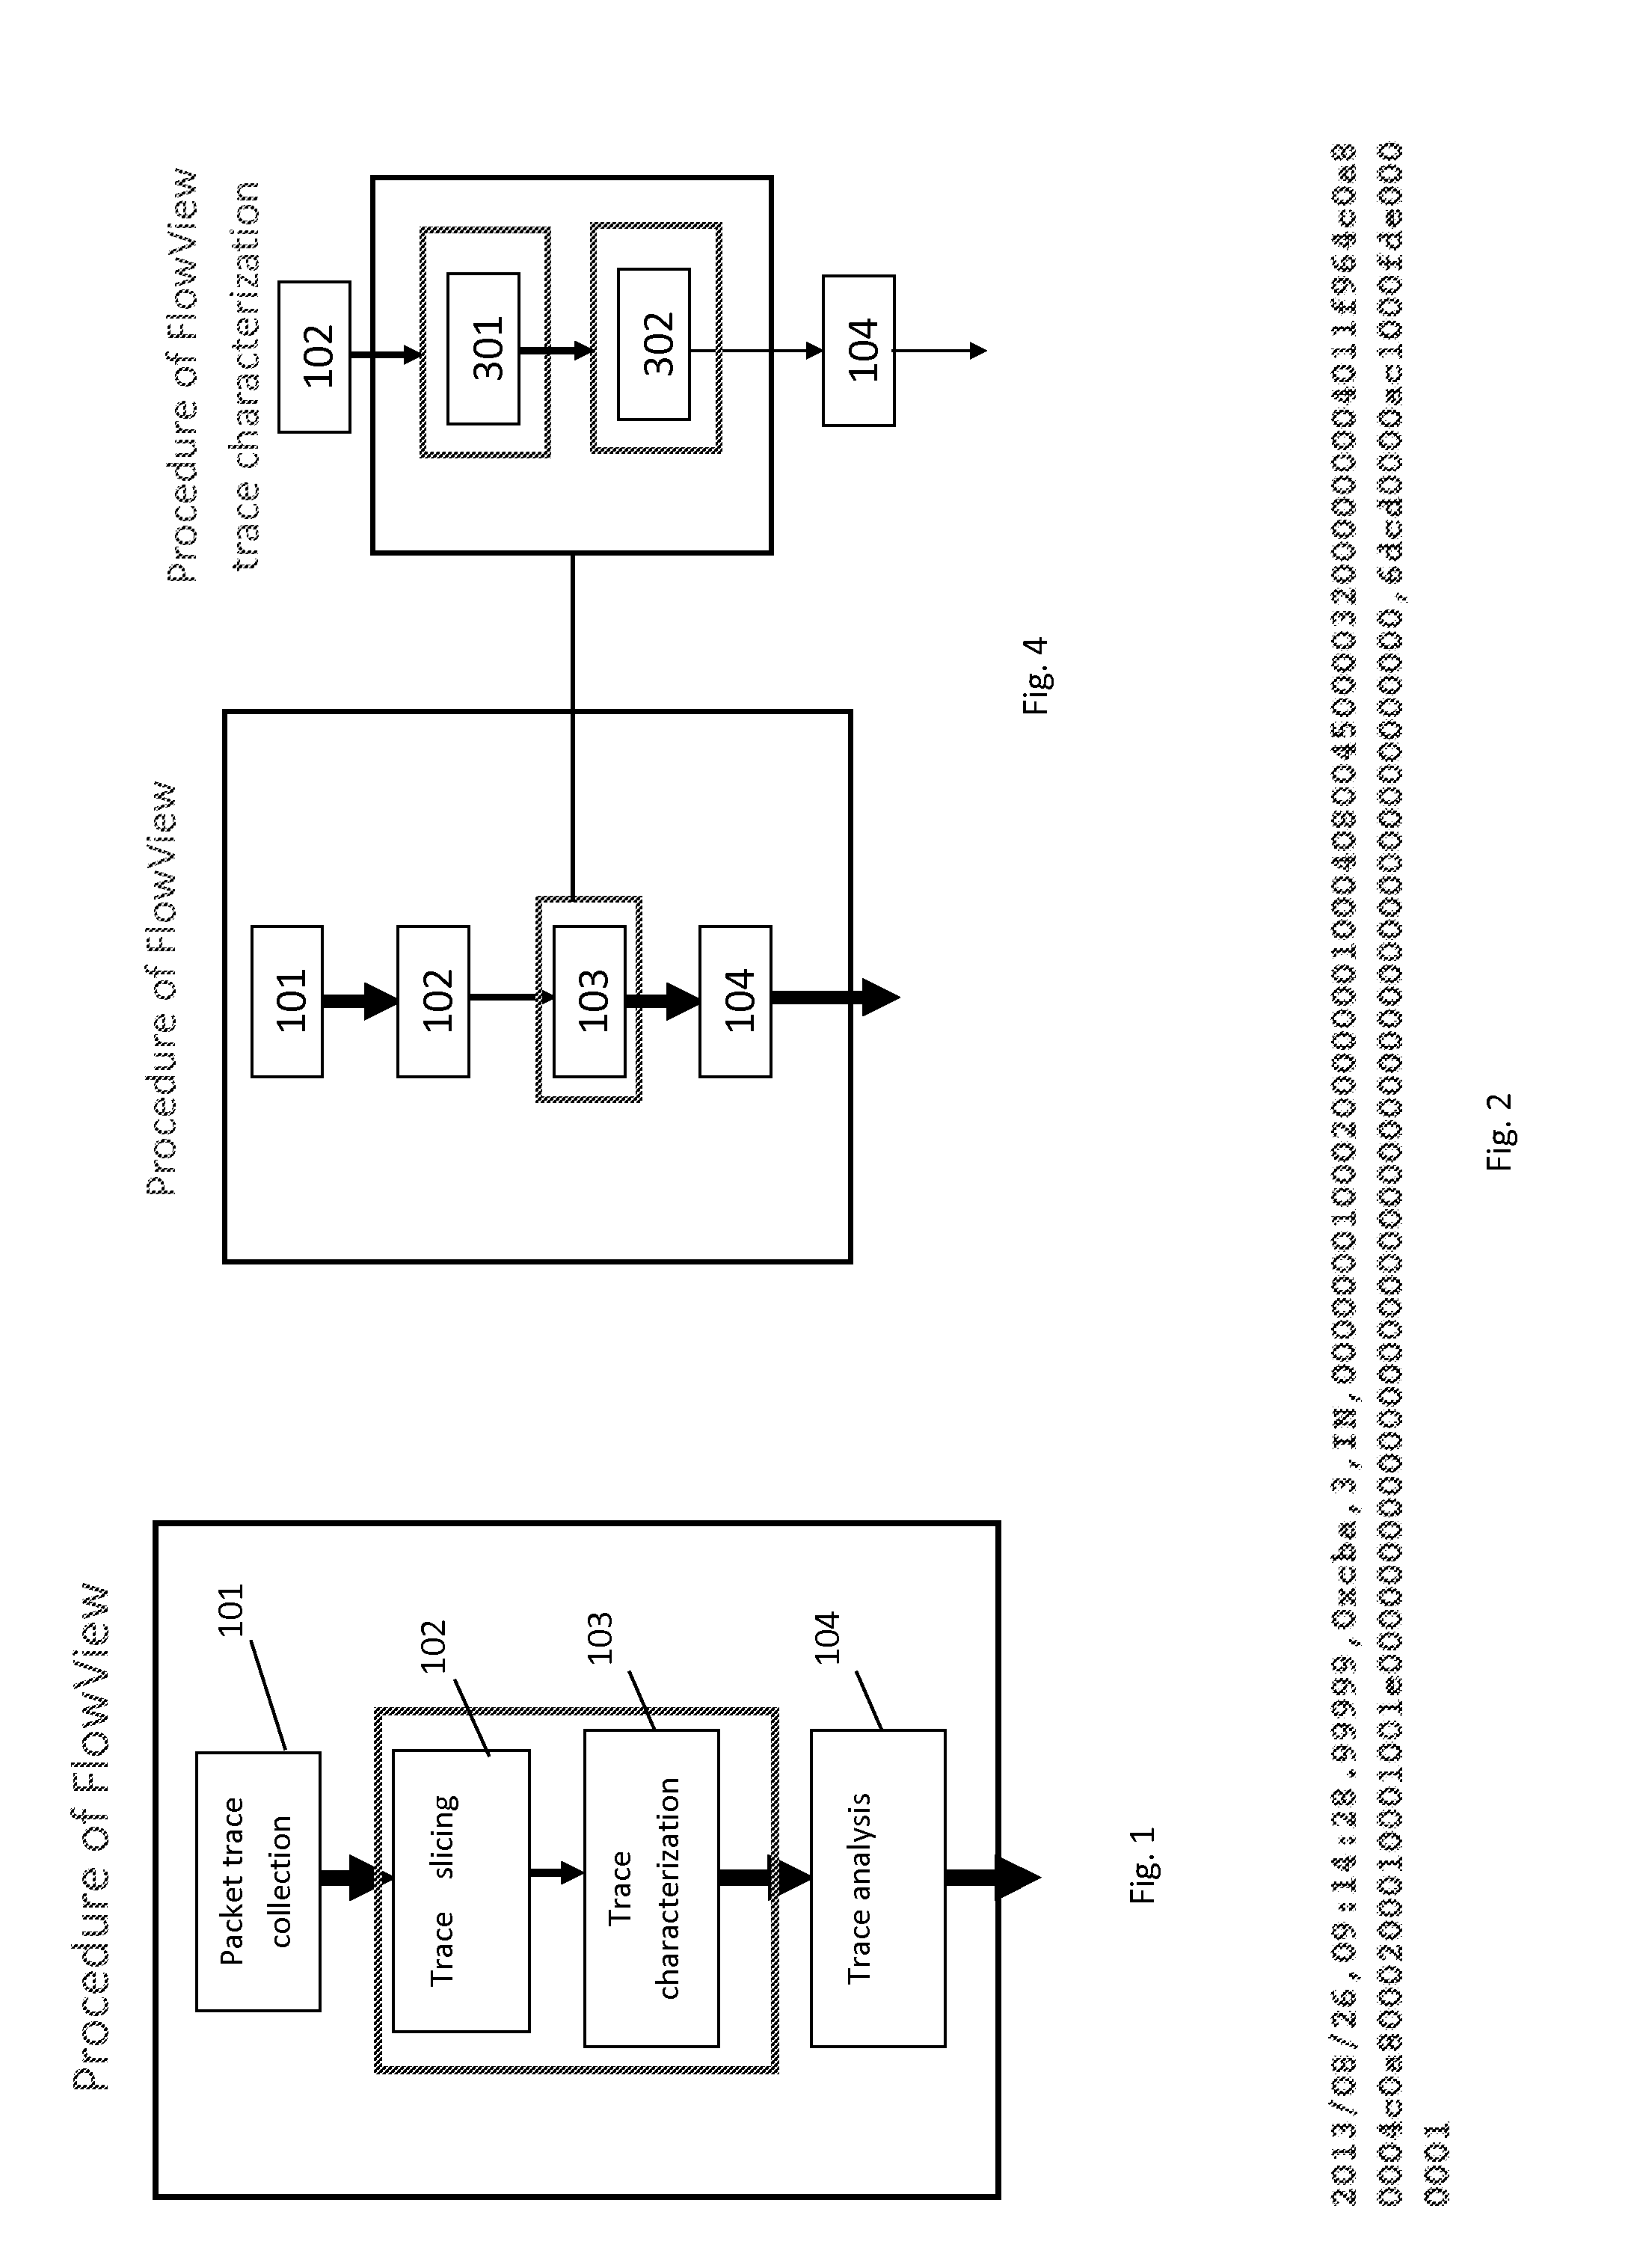 System and Method for Network Packet Event Characterization and Analysis